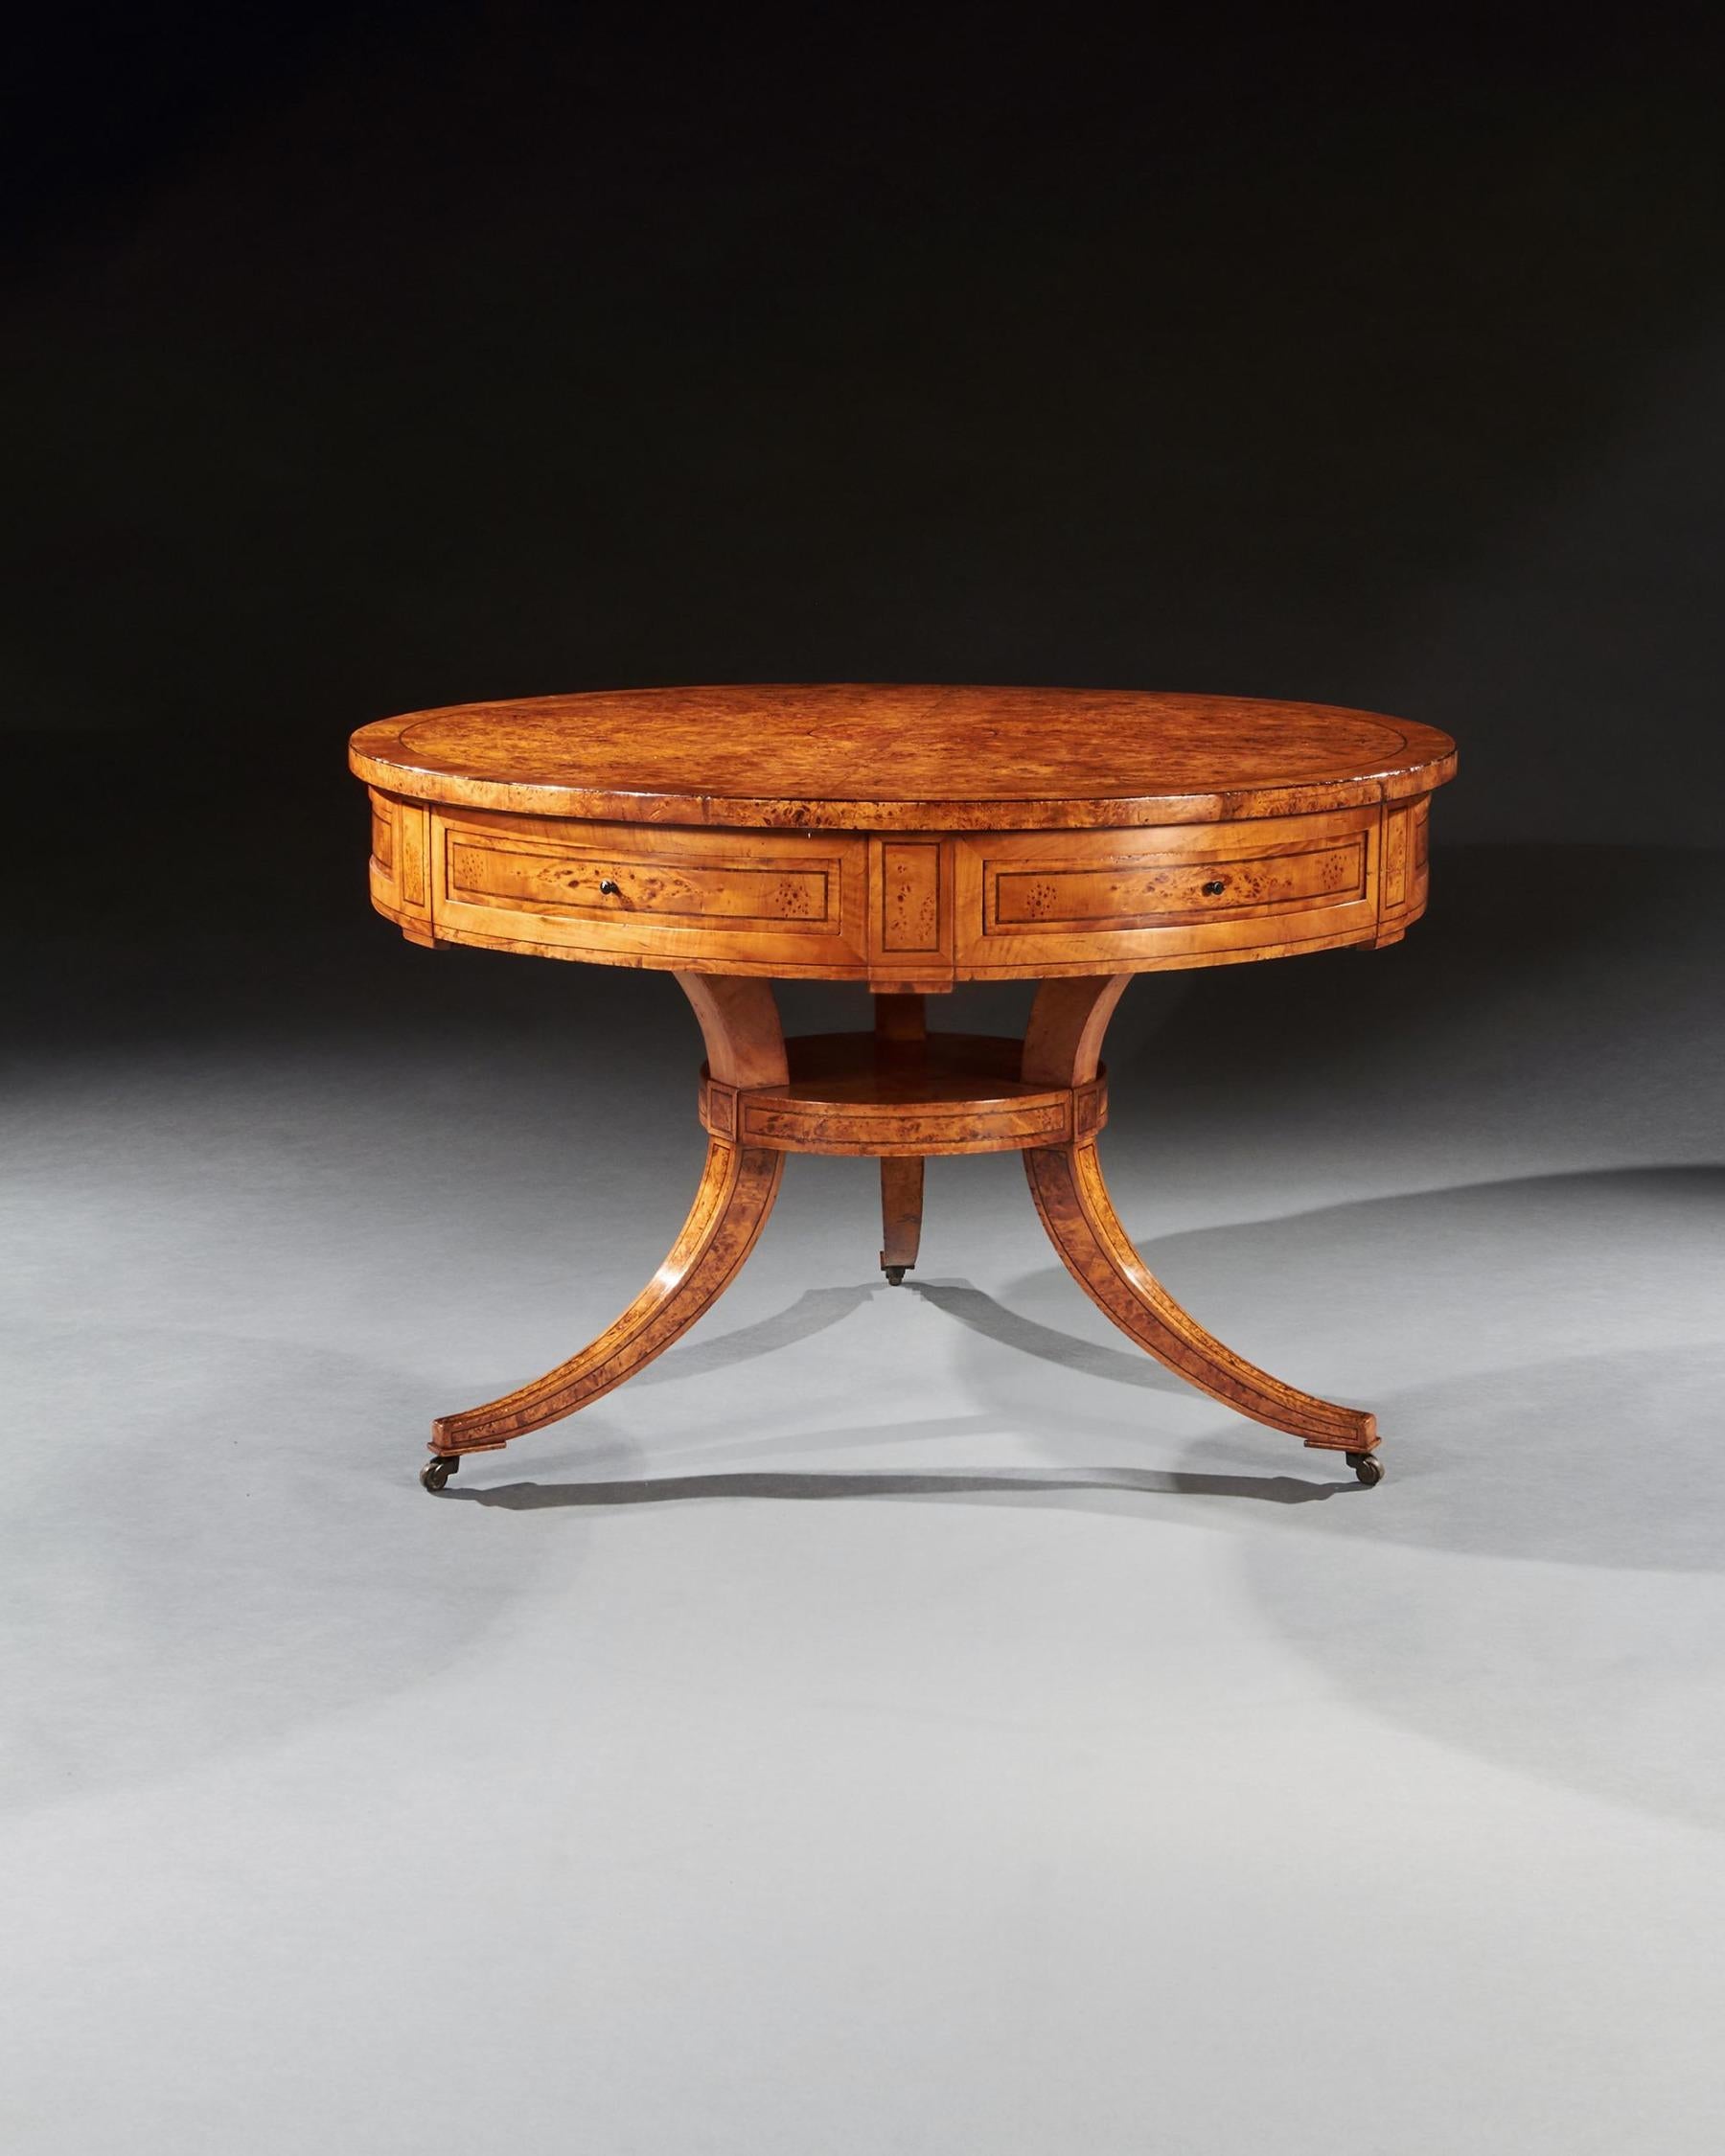 Rare Early 19th Century Scandinavian Burr Root Maple Drum Table For Sale 7